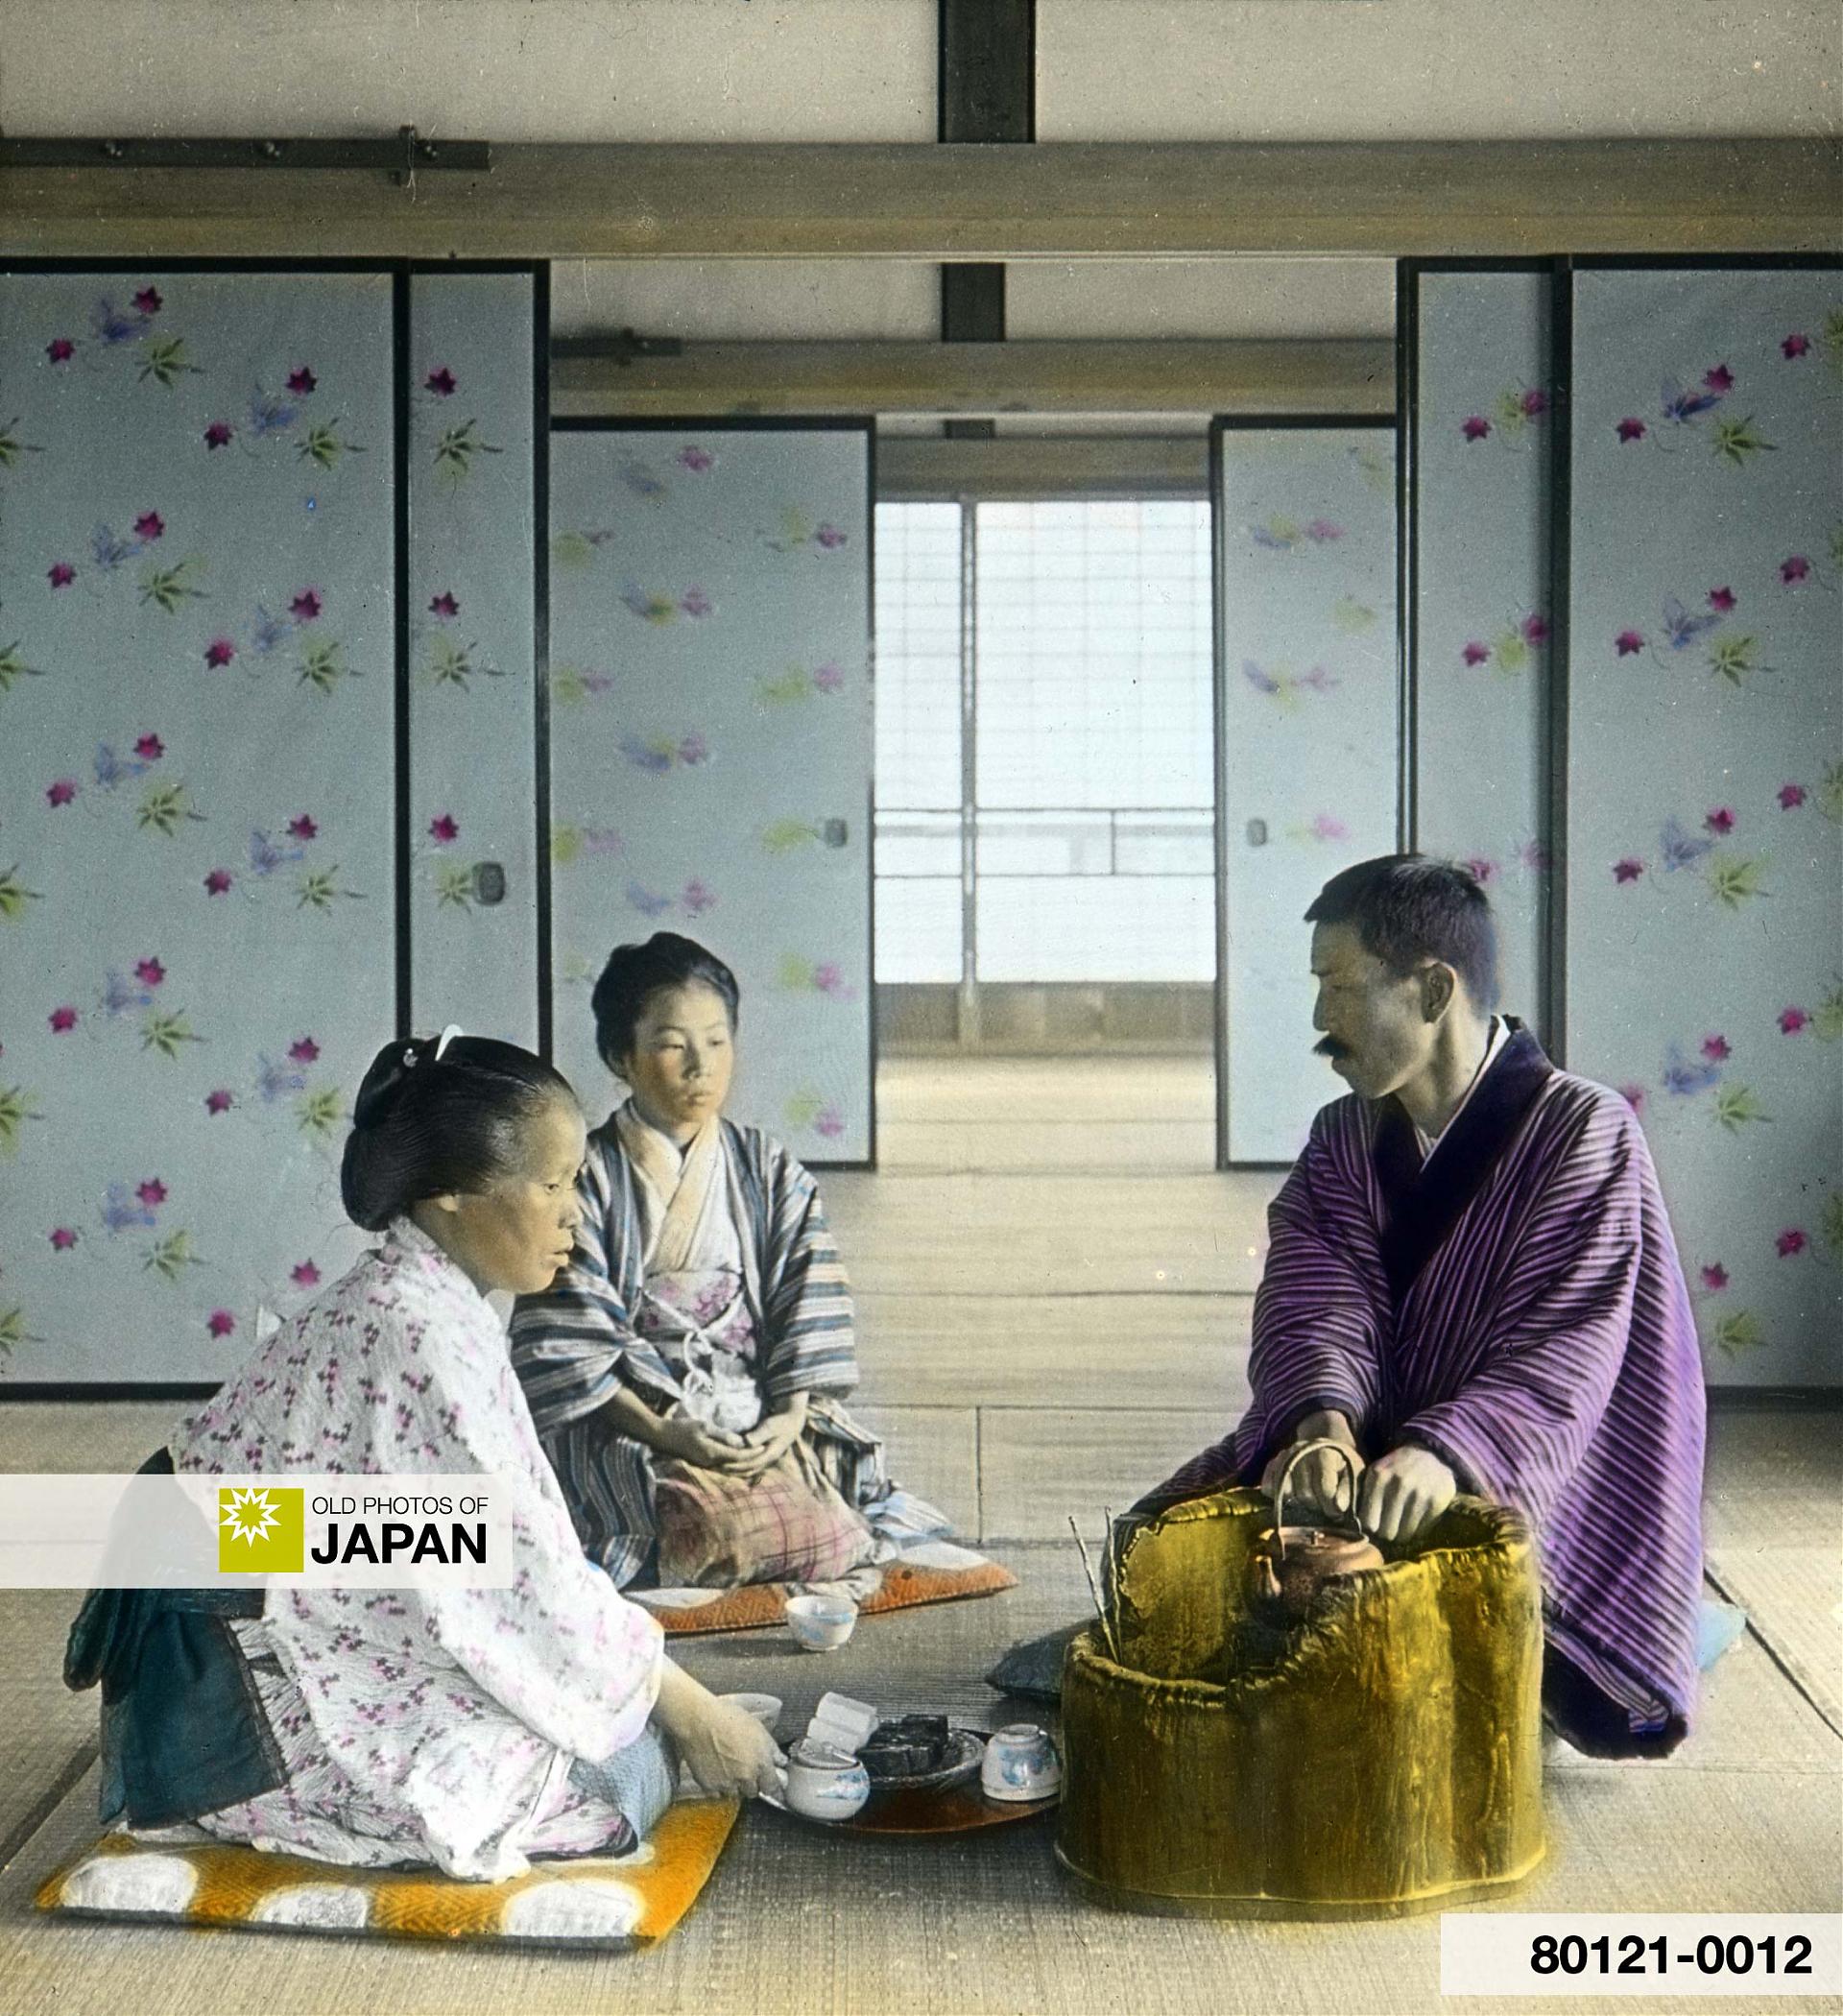 80121-0012 - A Japanese Man and Two Women Having Tea Inside a Room, 1930